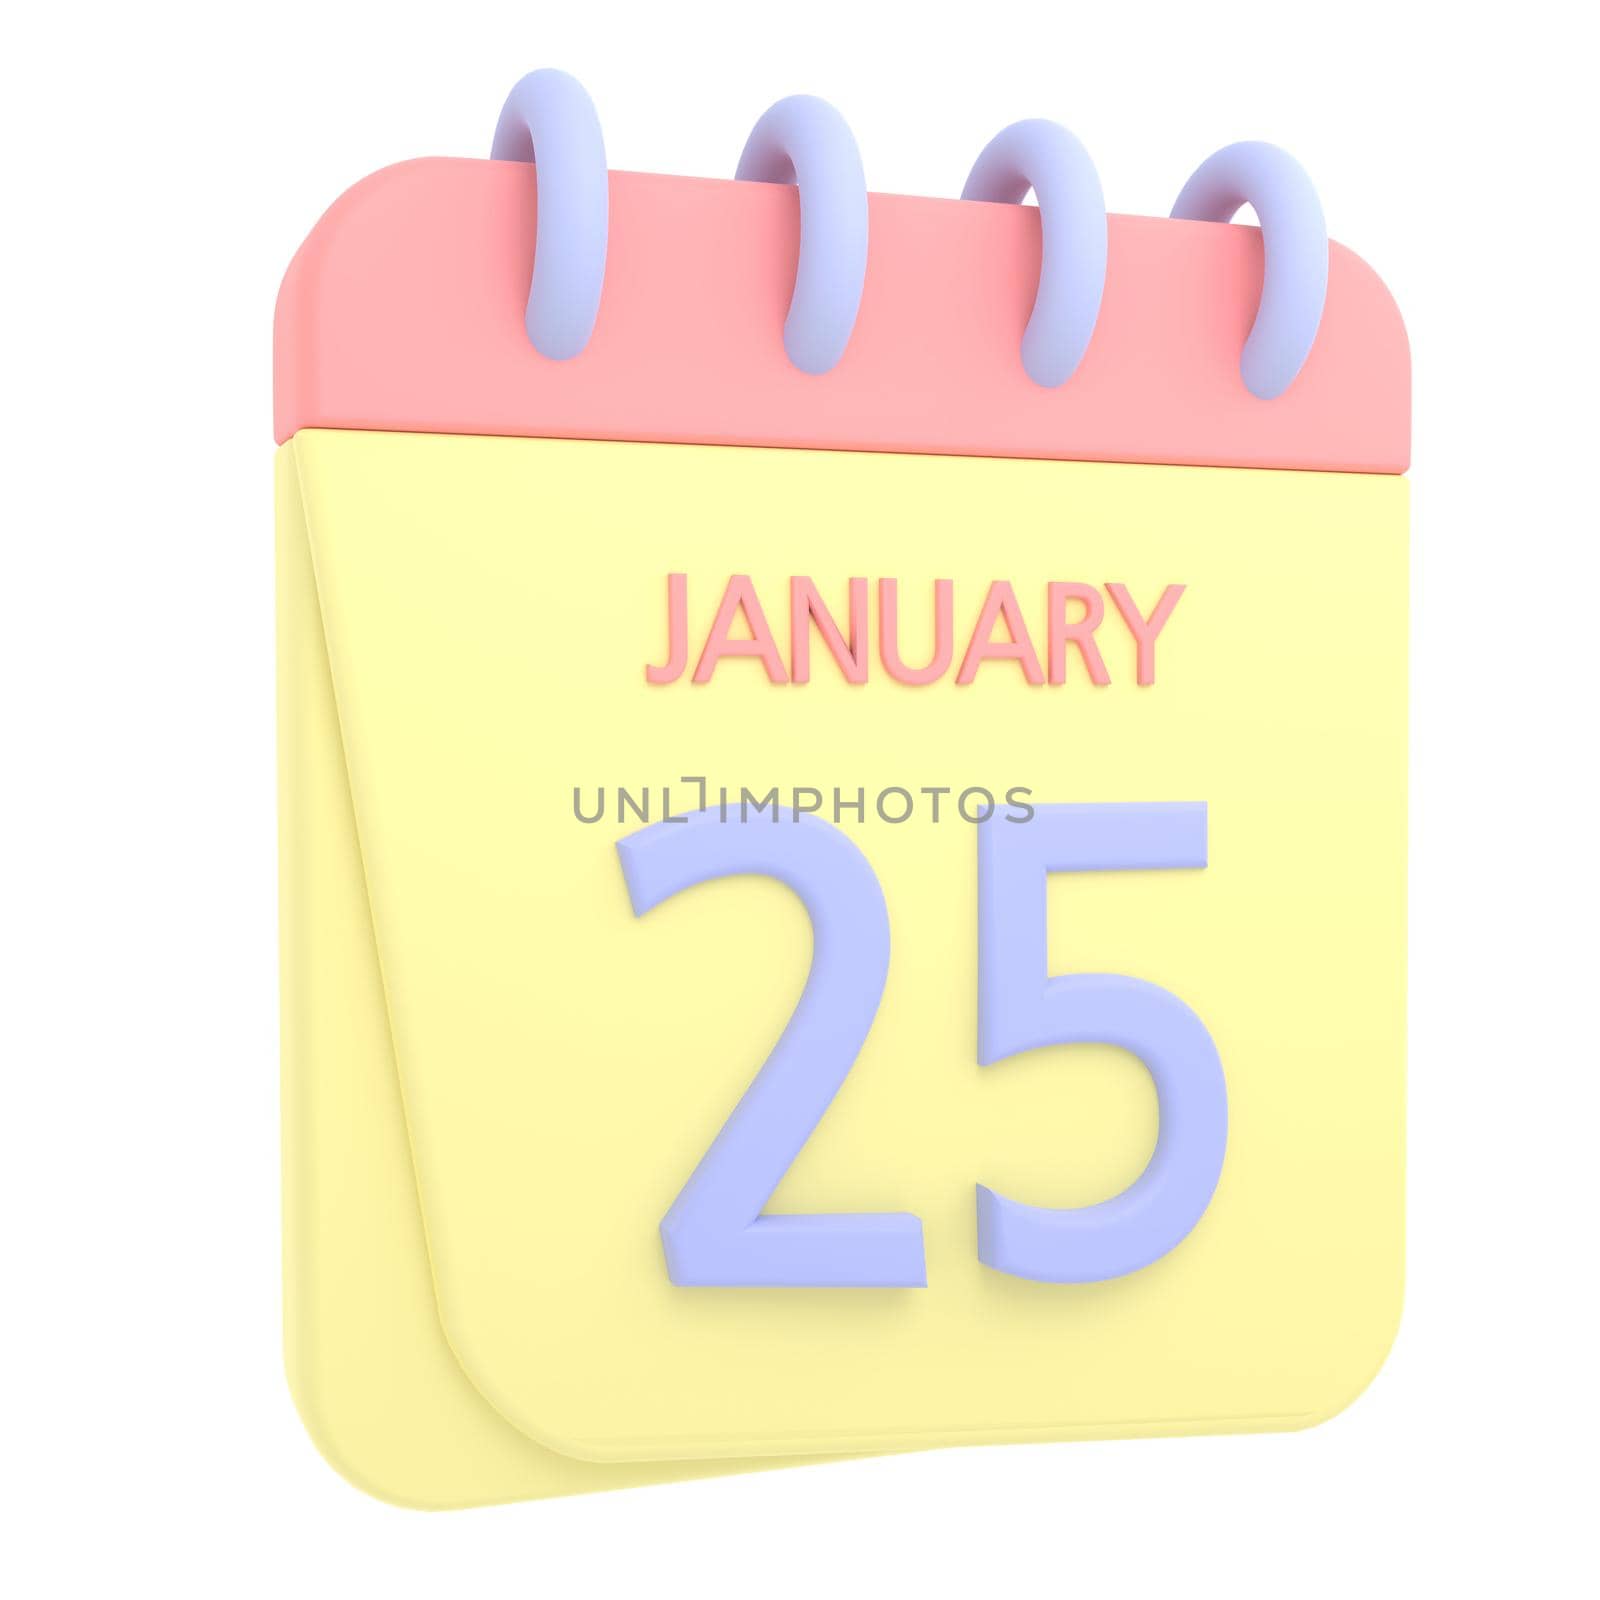 25th January 3D calendar icon. Web style. High resolution image. White background